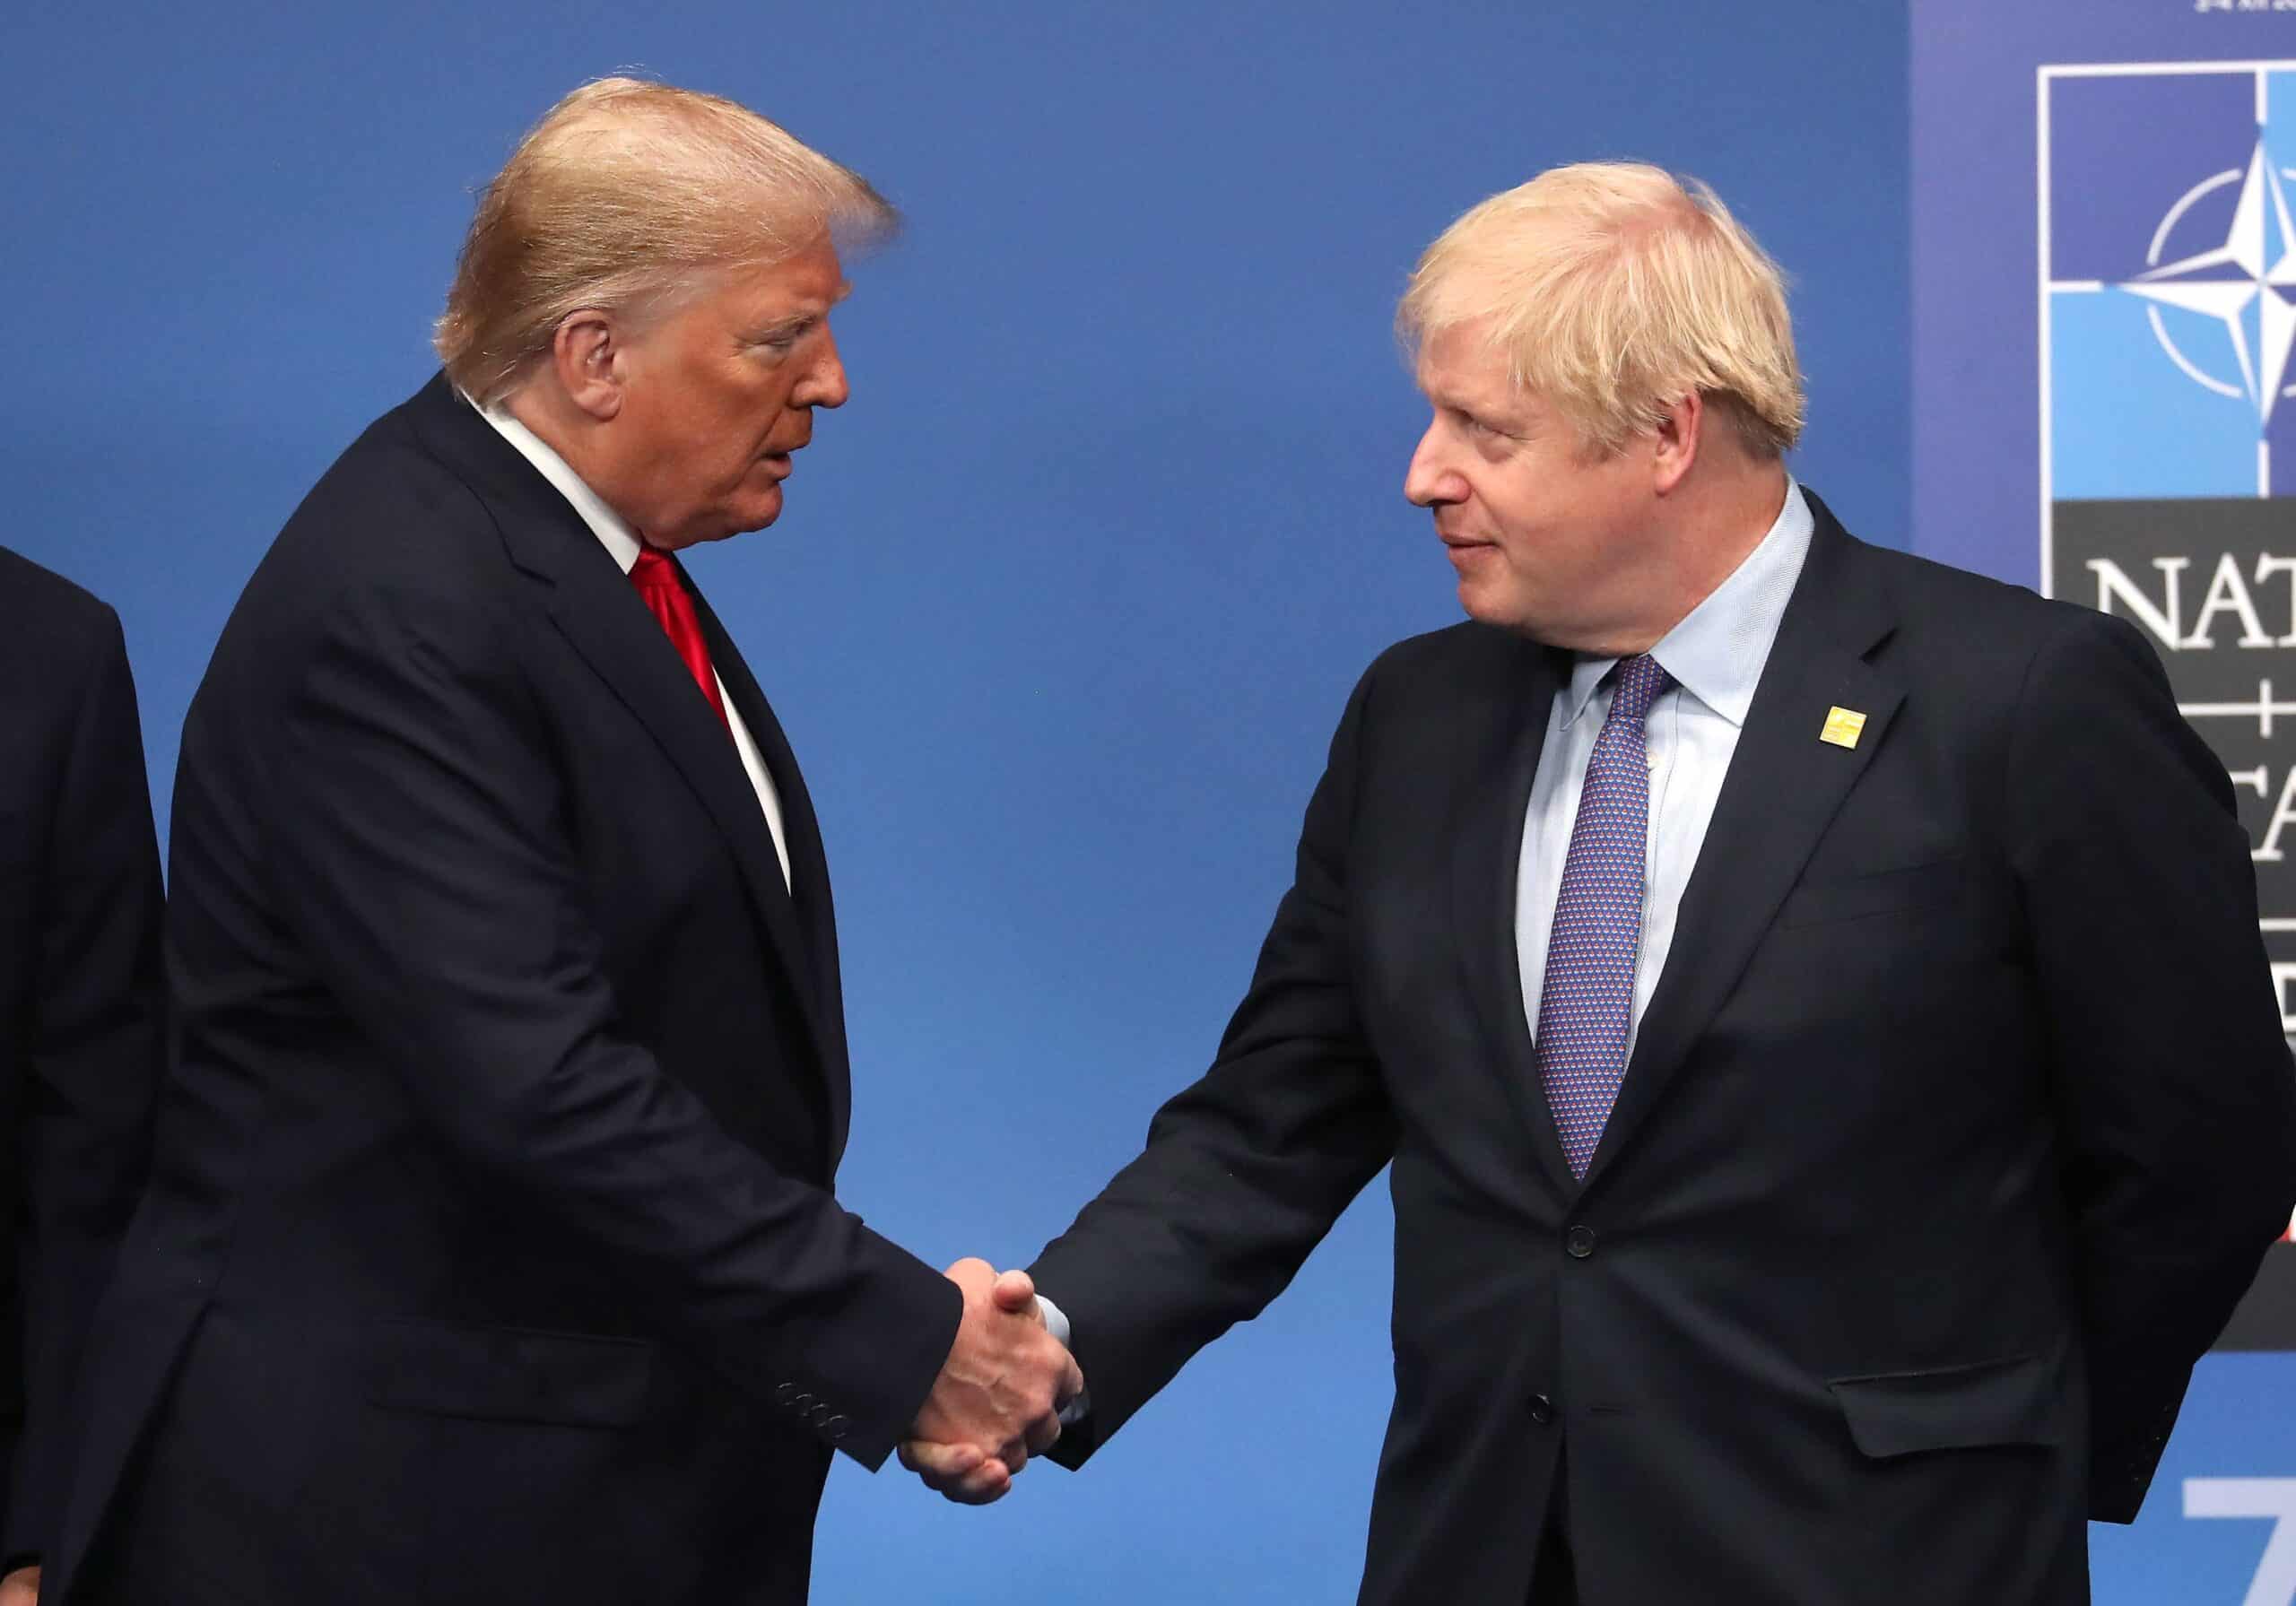 Boris Johnson says second Trump presidency could be ‘what the world needs’